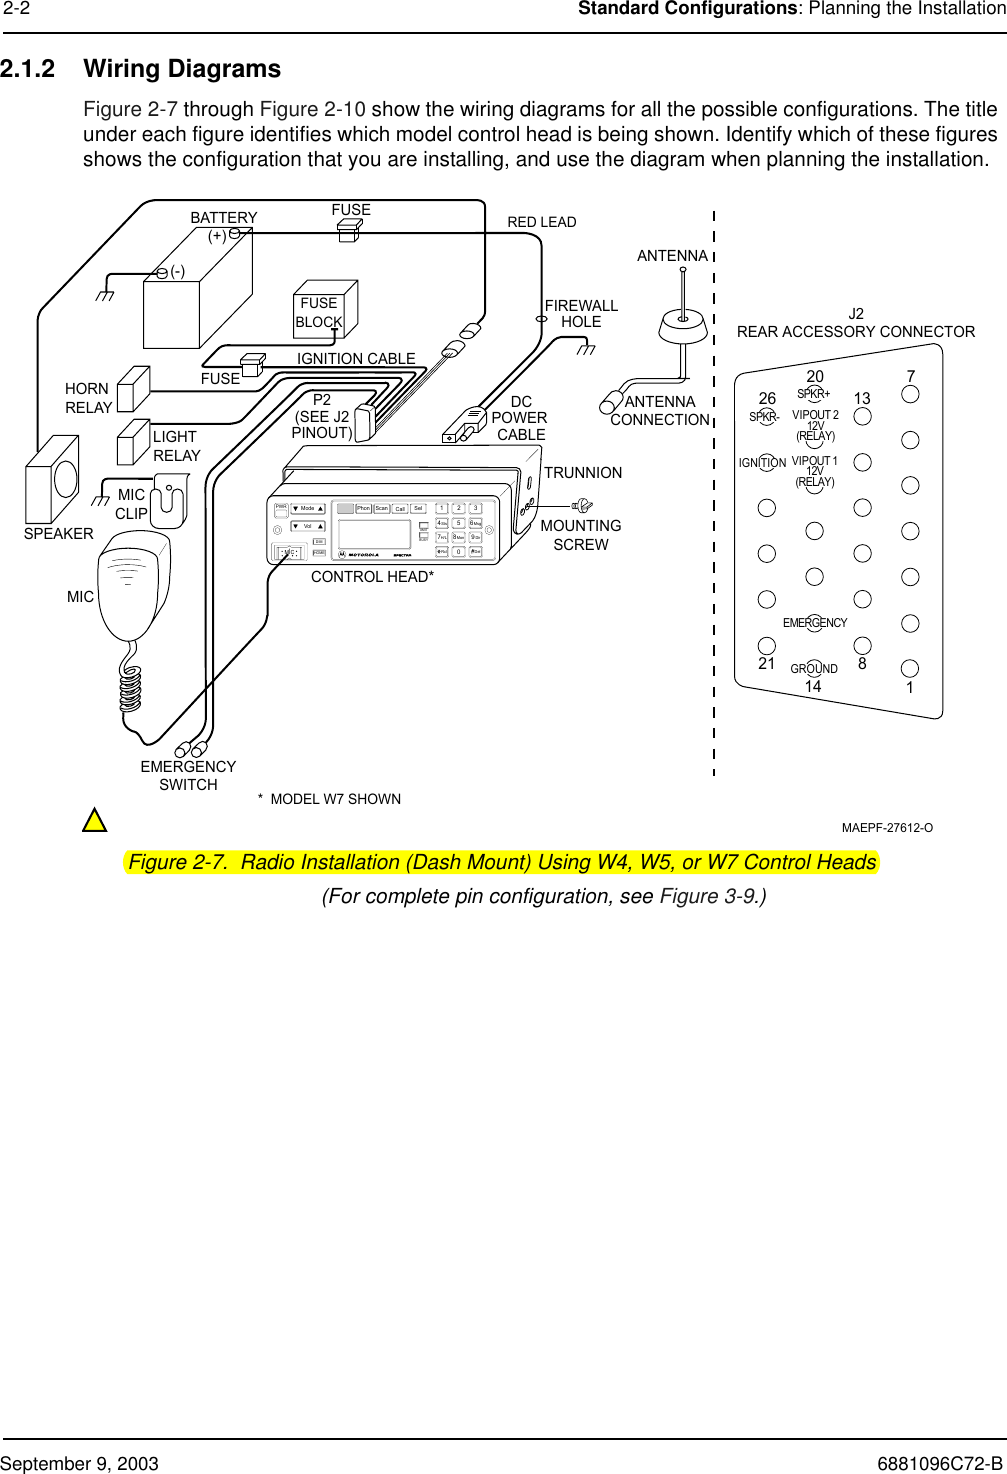 September 9, 2003 6881096C72-B2-2 Standard Configurations: Planning the Installation2.1.2 Wiring DiagramsFigure 2-7 through Figure 2-10 show the wiring diagrams for all the possible configurations. The title under each figure identifies which model control head is being shown. Identify which of these figures shows the configuration that you are installing, and use the diagram when planning the installation.Figure 2-7.  Radio Installation (Dash Mount) Using W4, W5, or W7 Control Heads (For complete pin configuration, see Figure 3-9.)PWRMode ScanPhon SelCallVolDIMHOMEXMITBUSY12345678 90Sts MsgH/L Mon DirRcl DelMICBATTERYHORN RELAYLIGHT RELAYMICCLIPSPEAKERMICEMERGENCYSWITCHFUSEFUSEBLOCK(+)(-)RED LEADFUSEFIREWALLHOLEMOUNTINGSCREWCONTROL HEAD**  MODEL W7 SHOWNANTENNA CONNECTION ANTENNAMAEPF-27612-OIGNITION CABLEP2(SEE J2PINOUT)DCPOWER CABLETRUNNIONJ2REAR ACCESSORY CONNECTOR1781413202126SPKR-SPKR+VIPOUT 212V(RELAY)VIPOUT 112V(RELAY)GROUNDEMERGENCYIGNITION